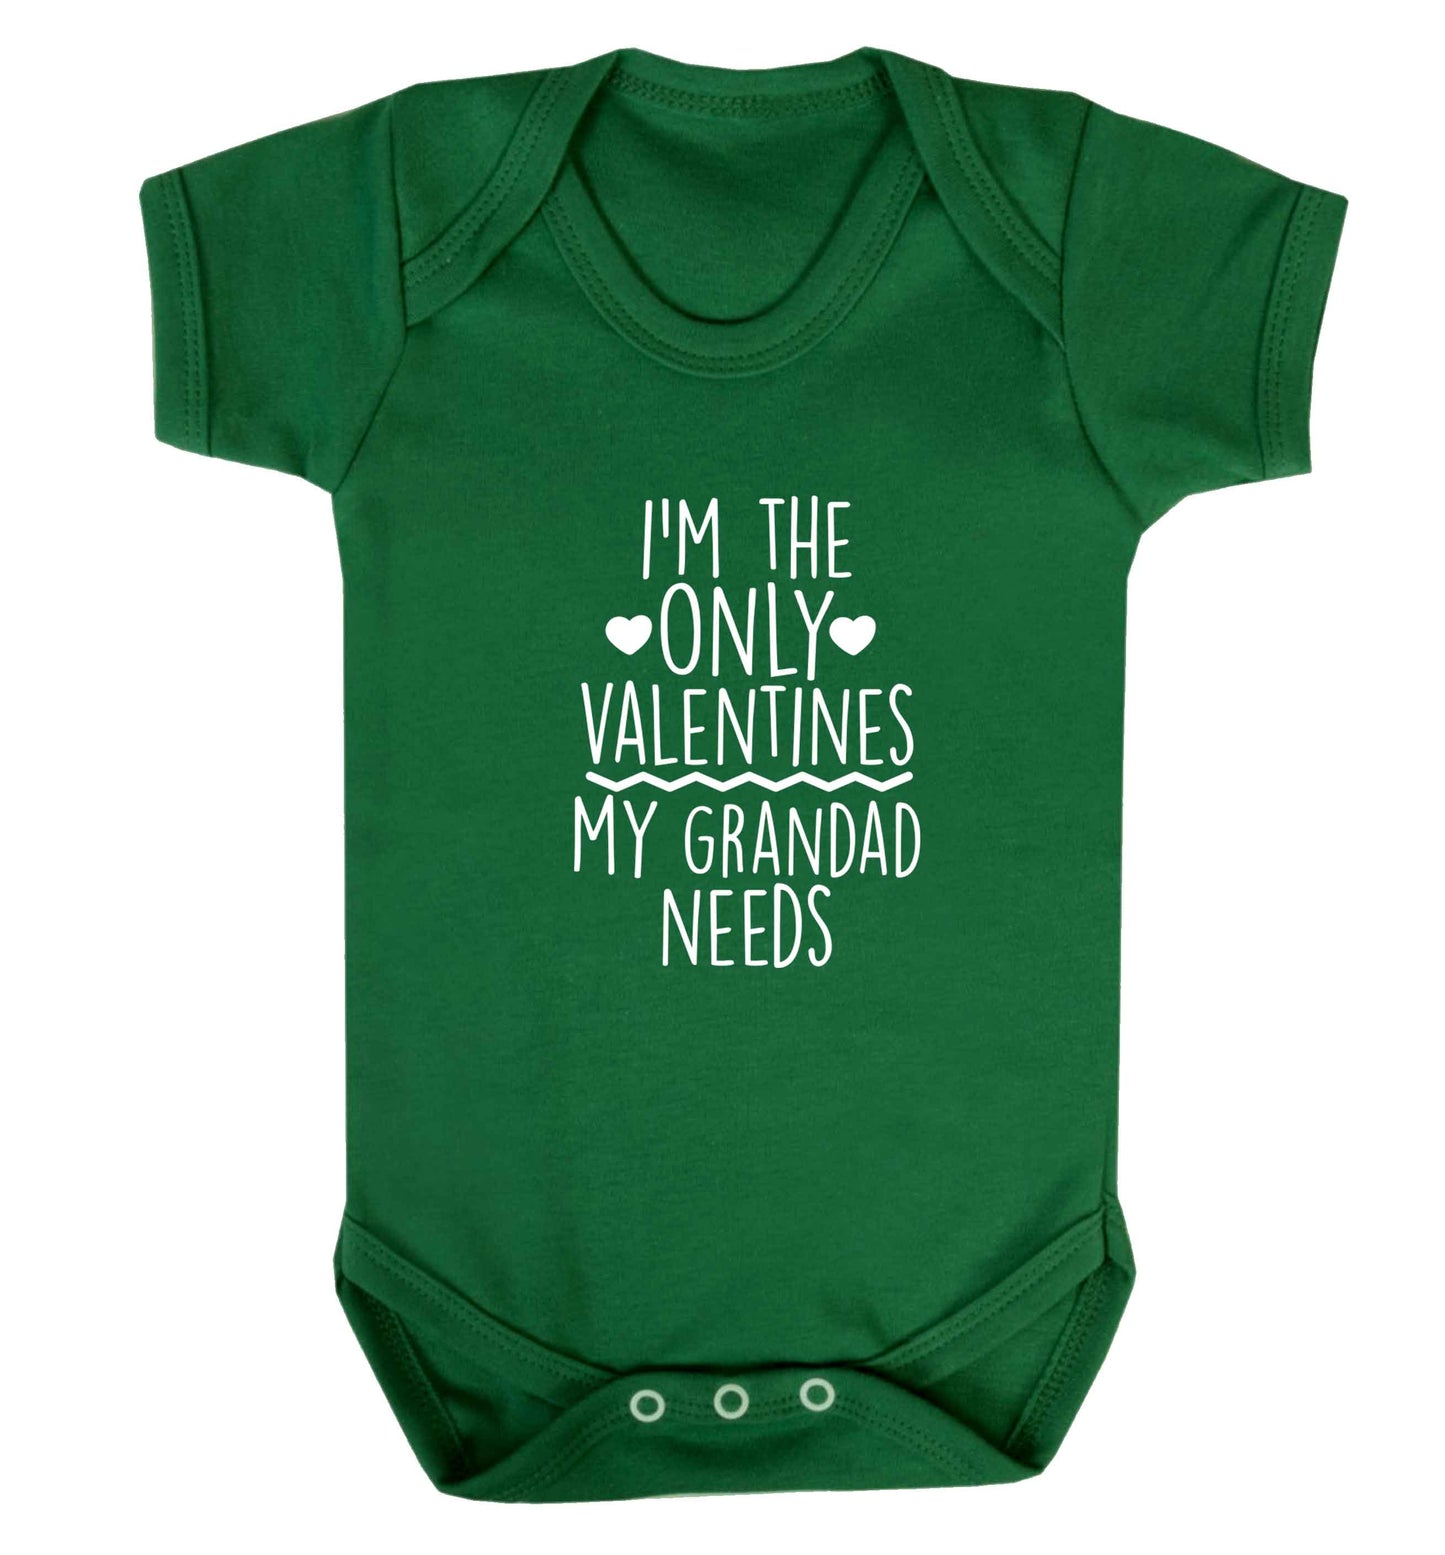 I'm the only valentines my grandad needs baby vest green 18-24 months